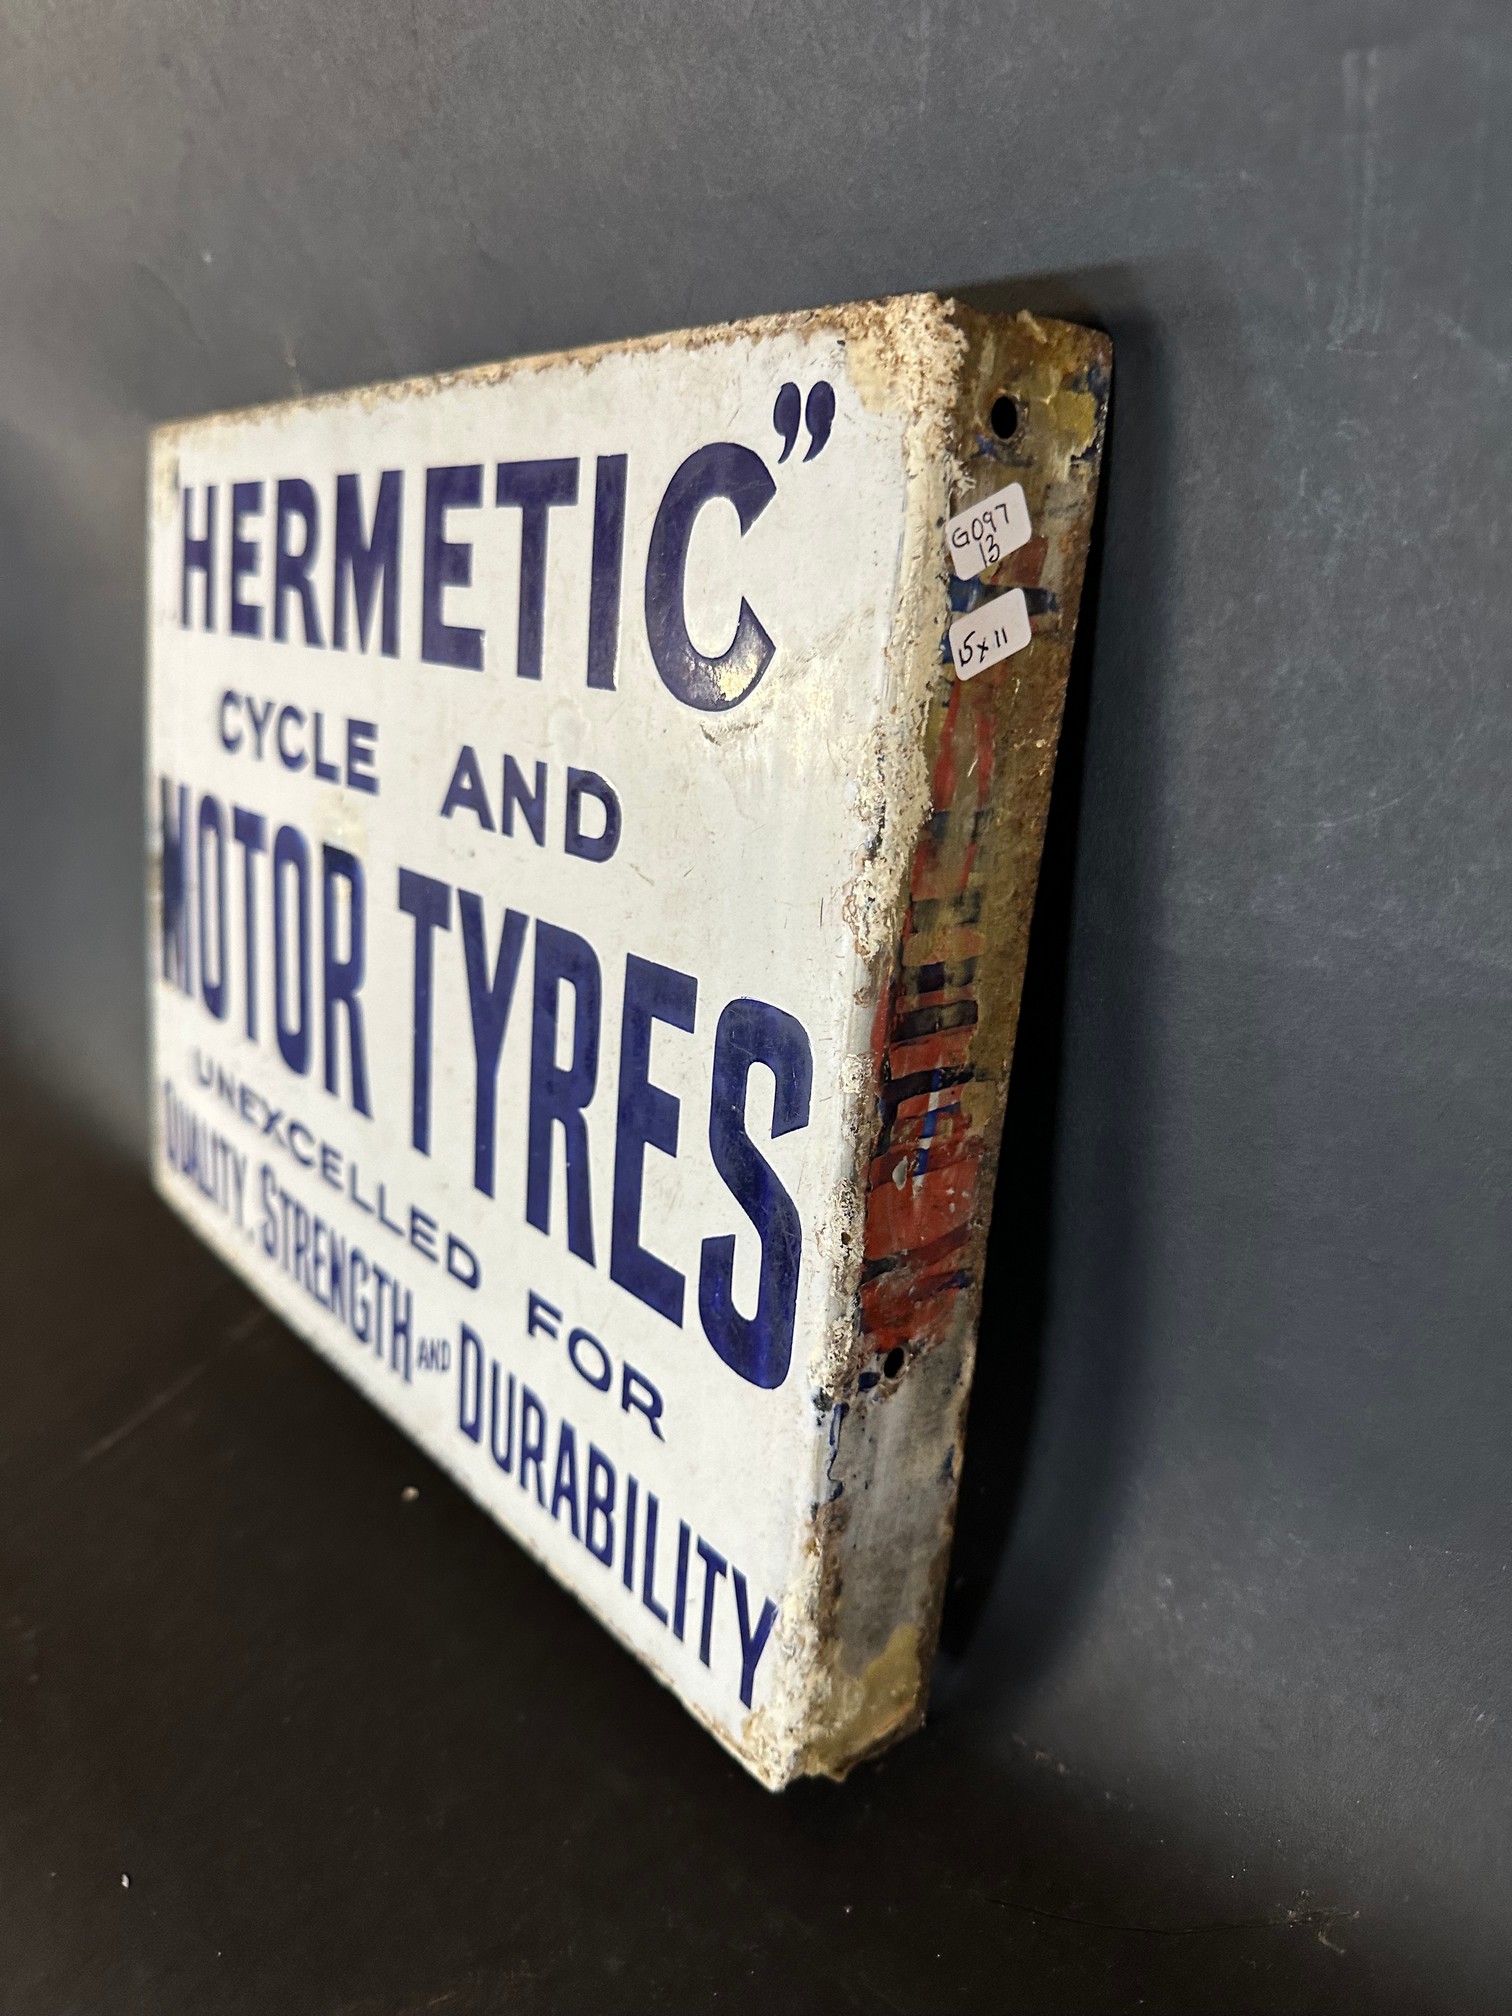 A Hermetic Cycle and Motor Tyres double sided enamel advertising sign with hanging flange in - Image 5 of 6